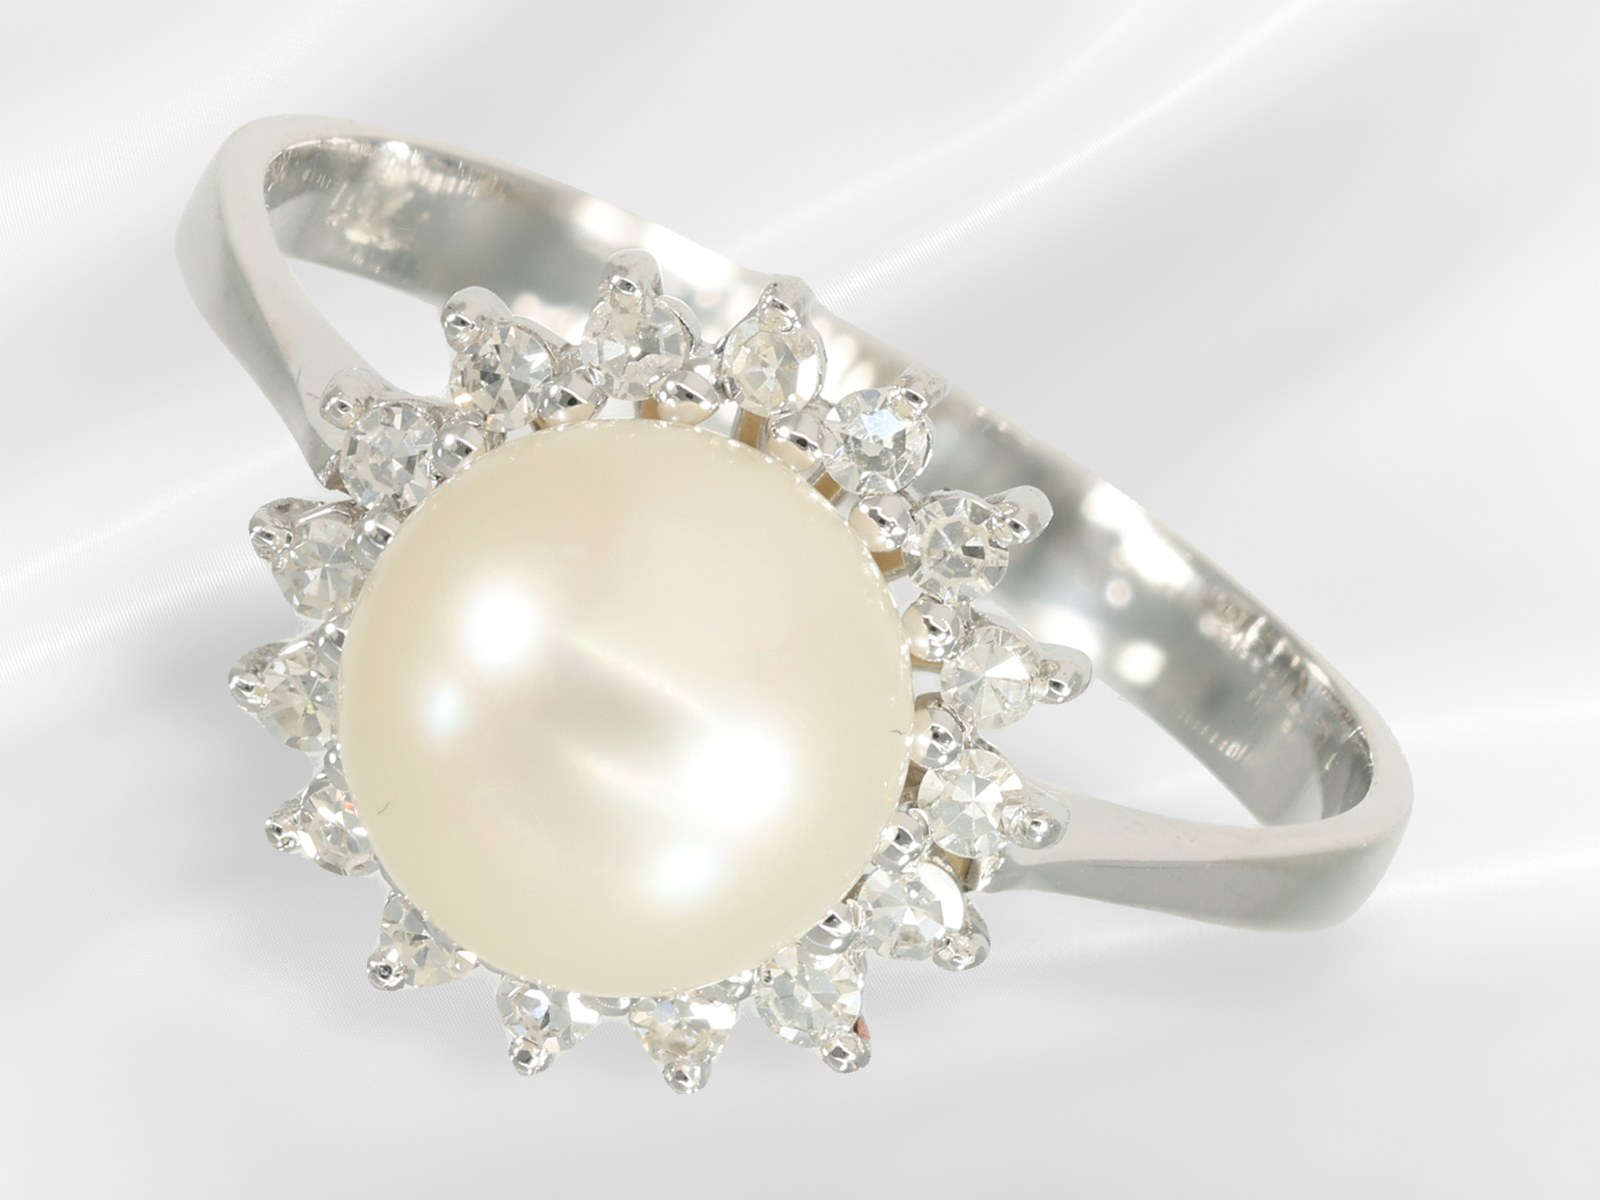 Ring: beautiful white gold ring with diamonds and a cultured pearl